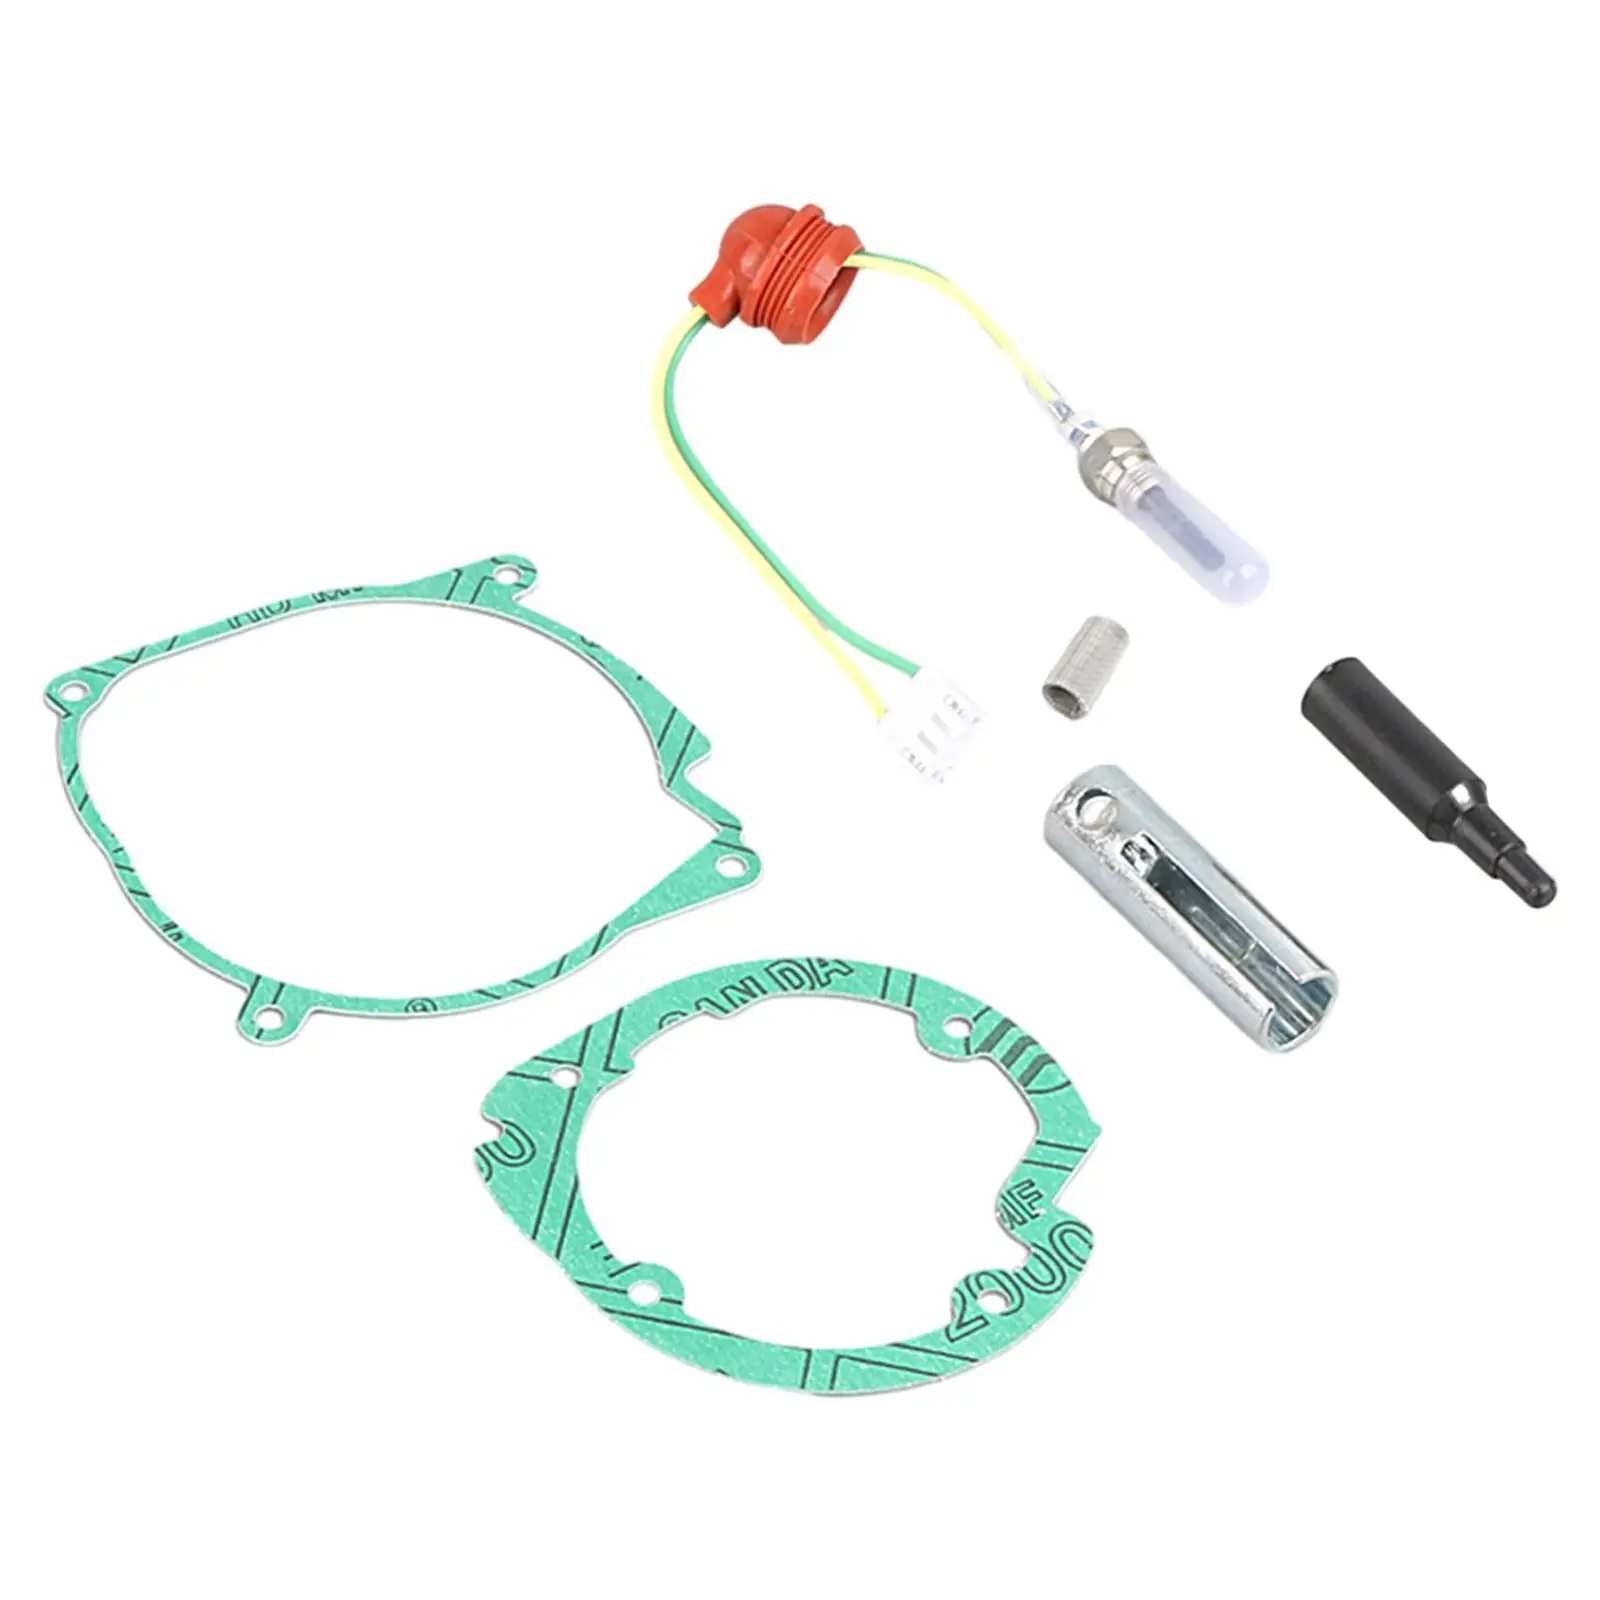 12V Glow Plug Repair Set 5kW Gaskets Replacement Accessories Easy Installation Parking Heater Maintenance Set Professional